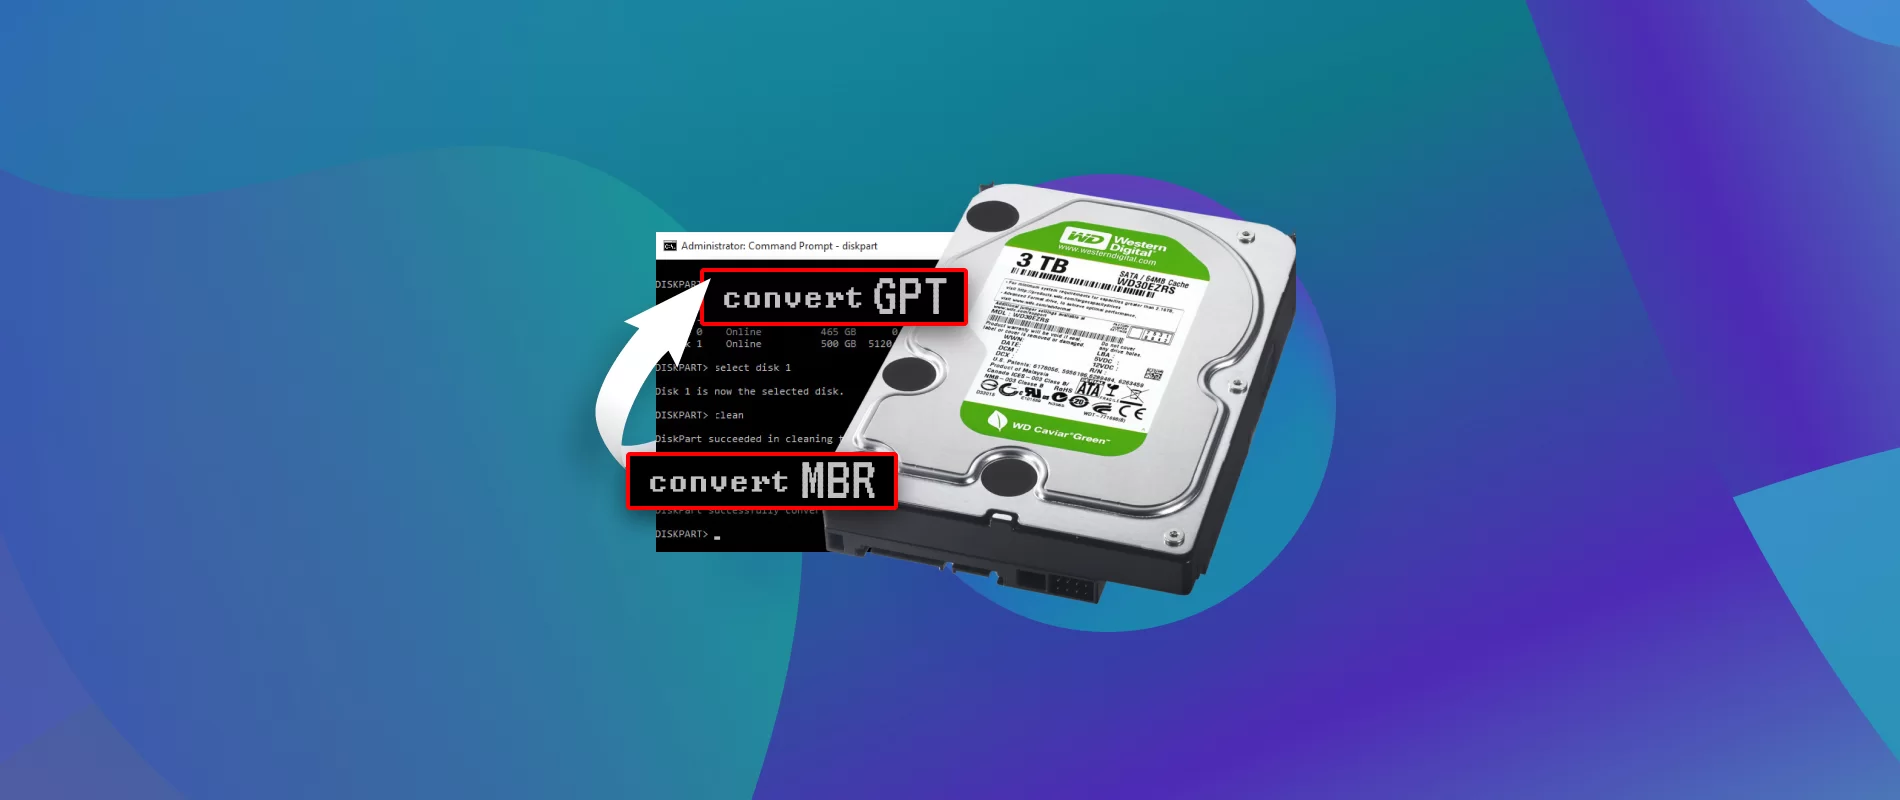 How To Configure A Solid State Drive To GPT